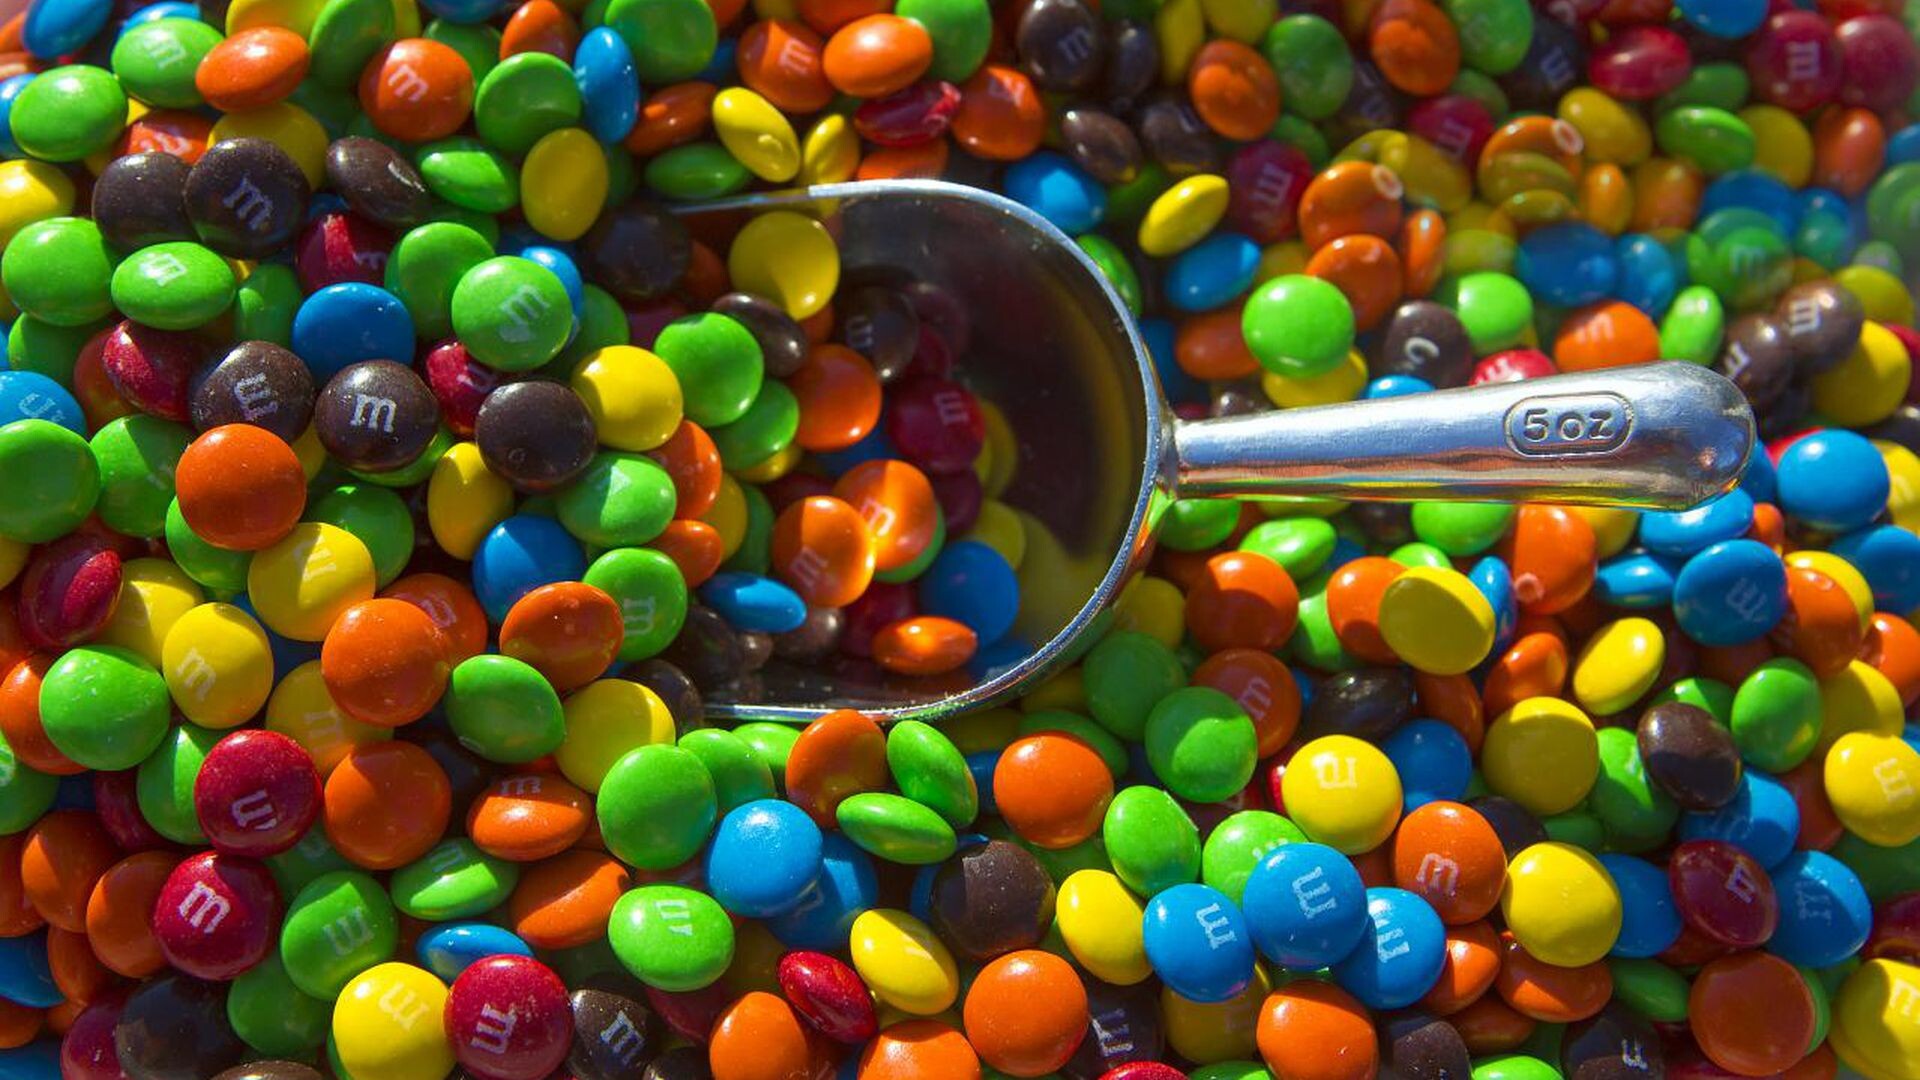 M&M’s: A candy shell around the chocolate center. 1920x1080 Full HD Wallpaper.